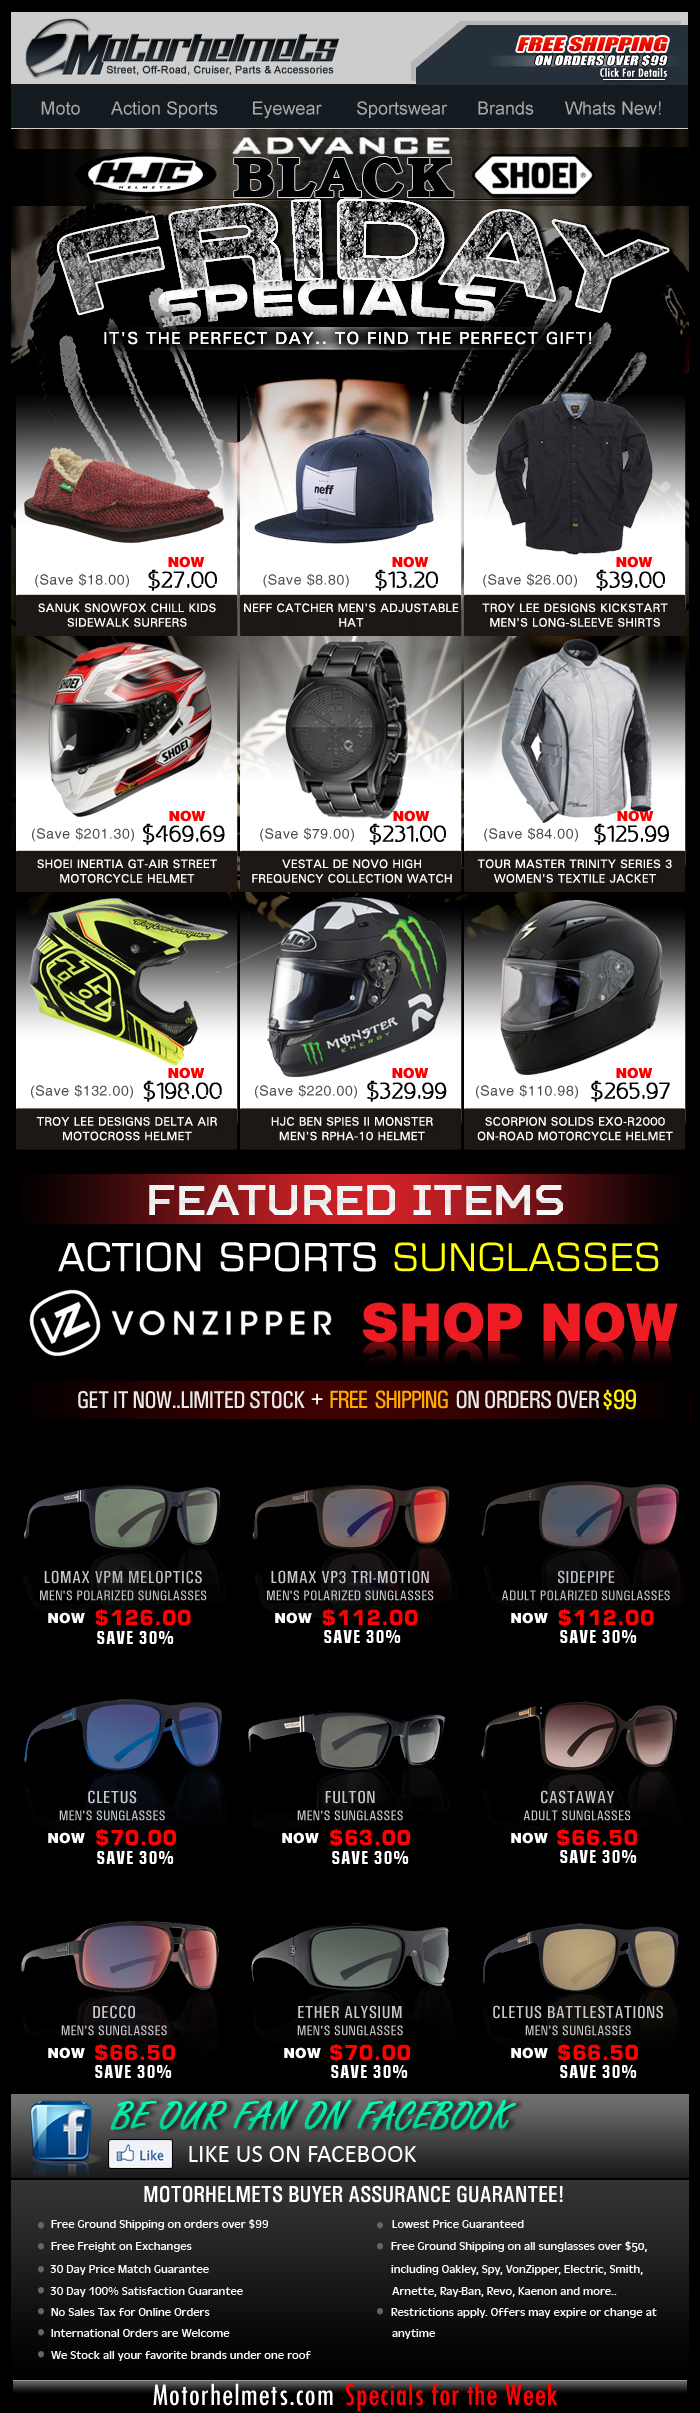 Early BLACK FRIDAY Deals...HJC, SHOEI and more premium items!